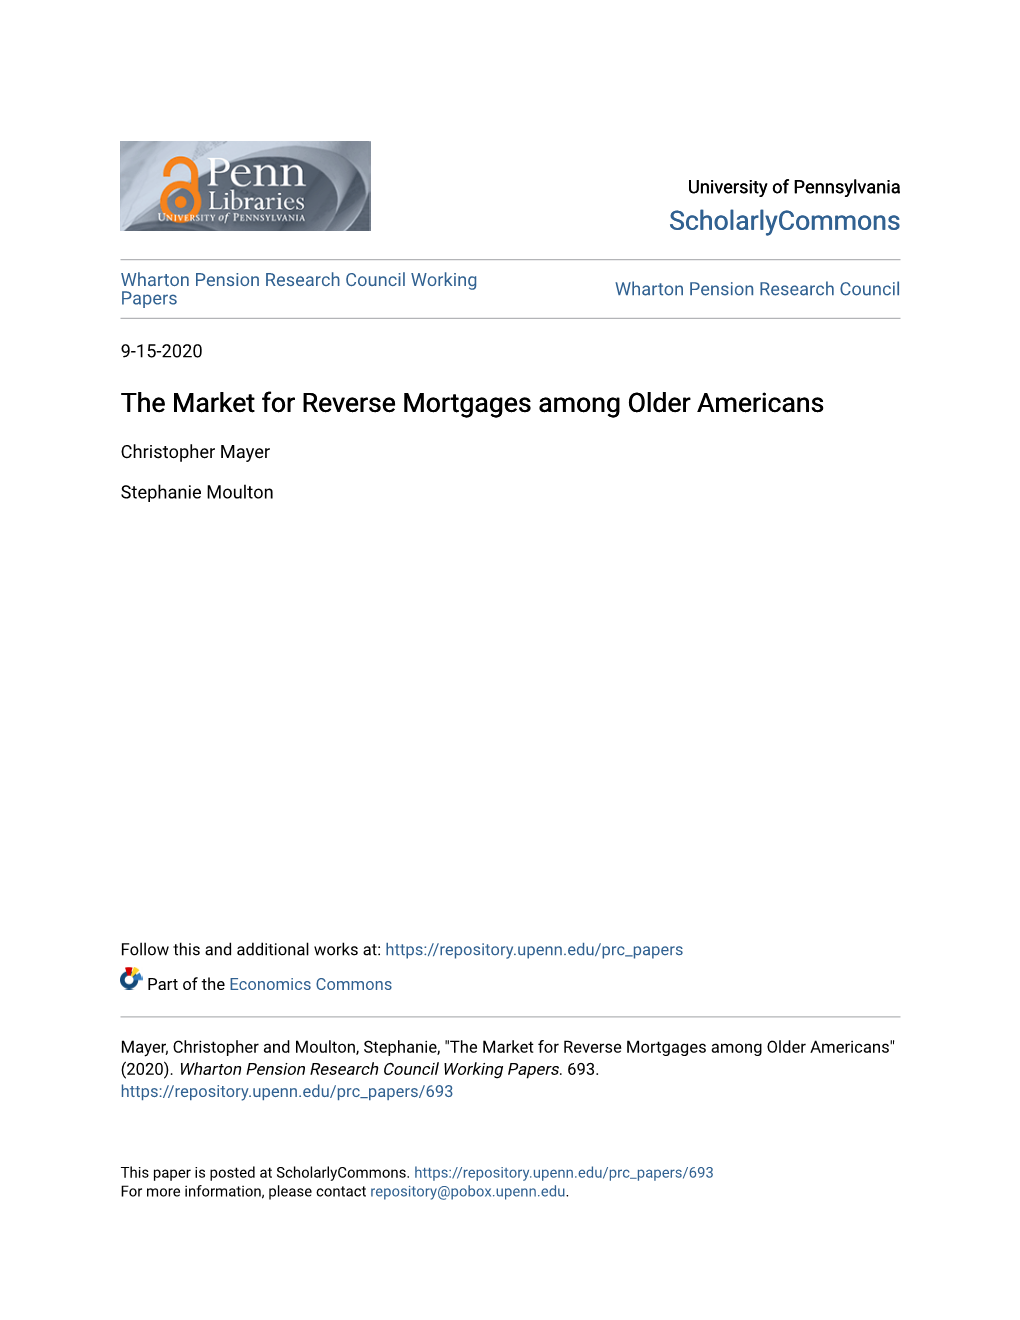 The Market for Reverse Mortgages Among Older Americans